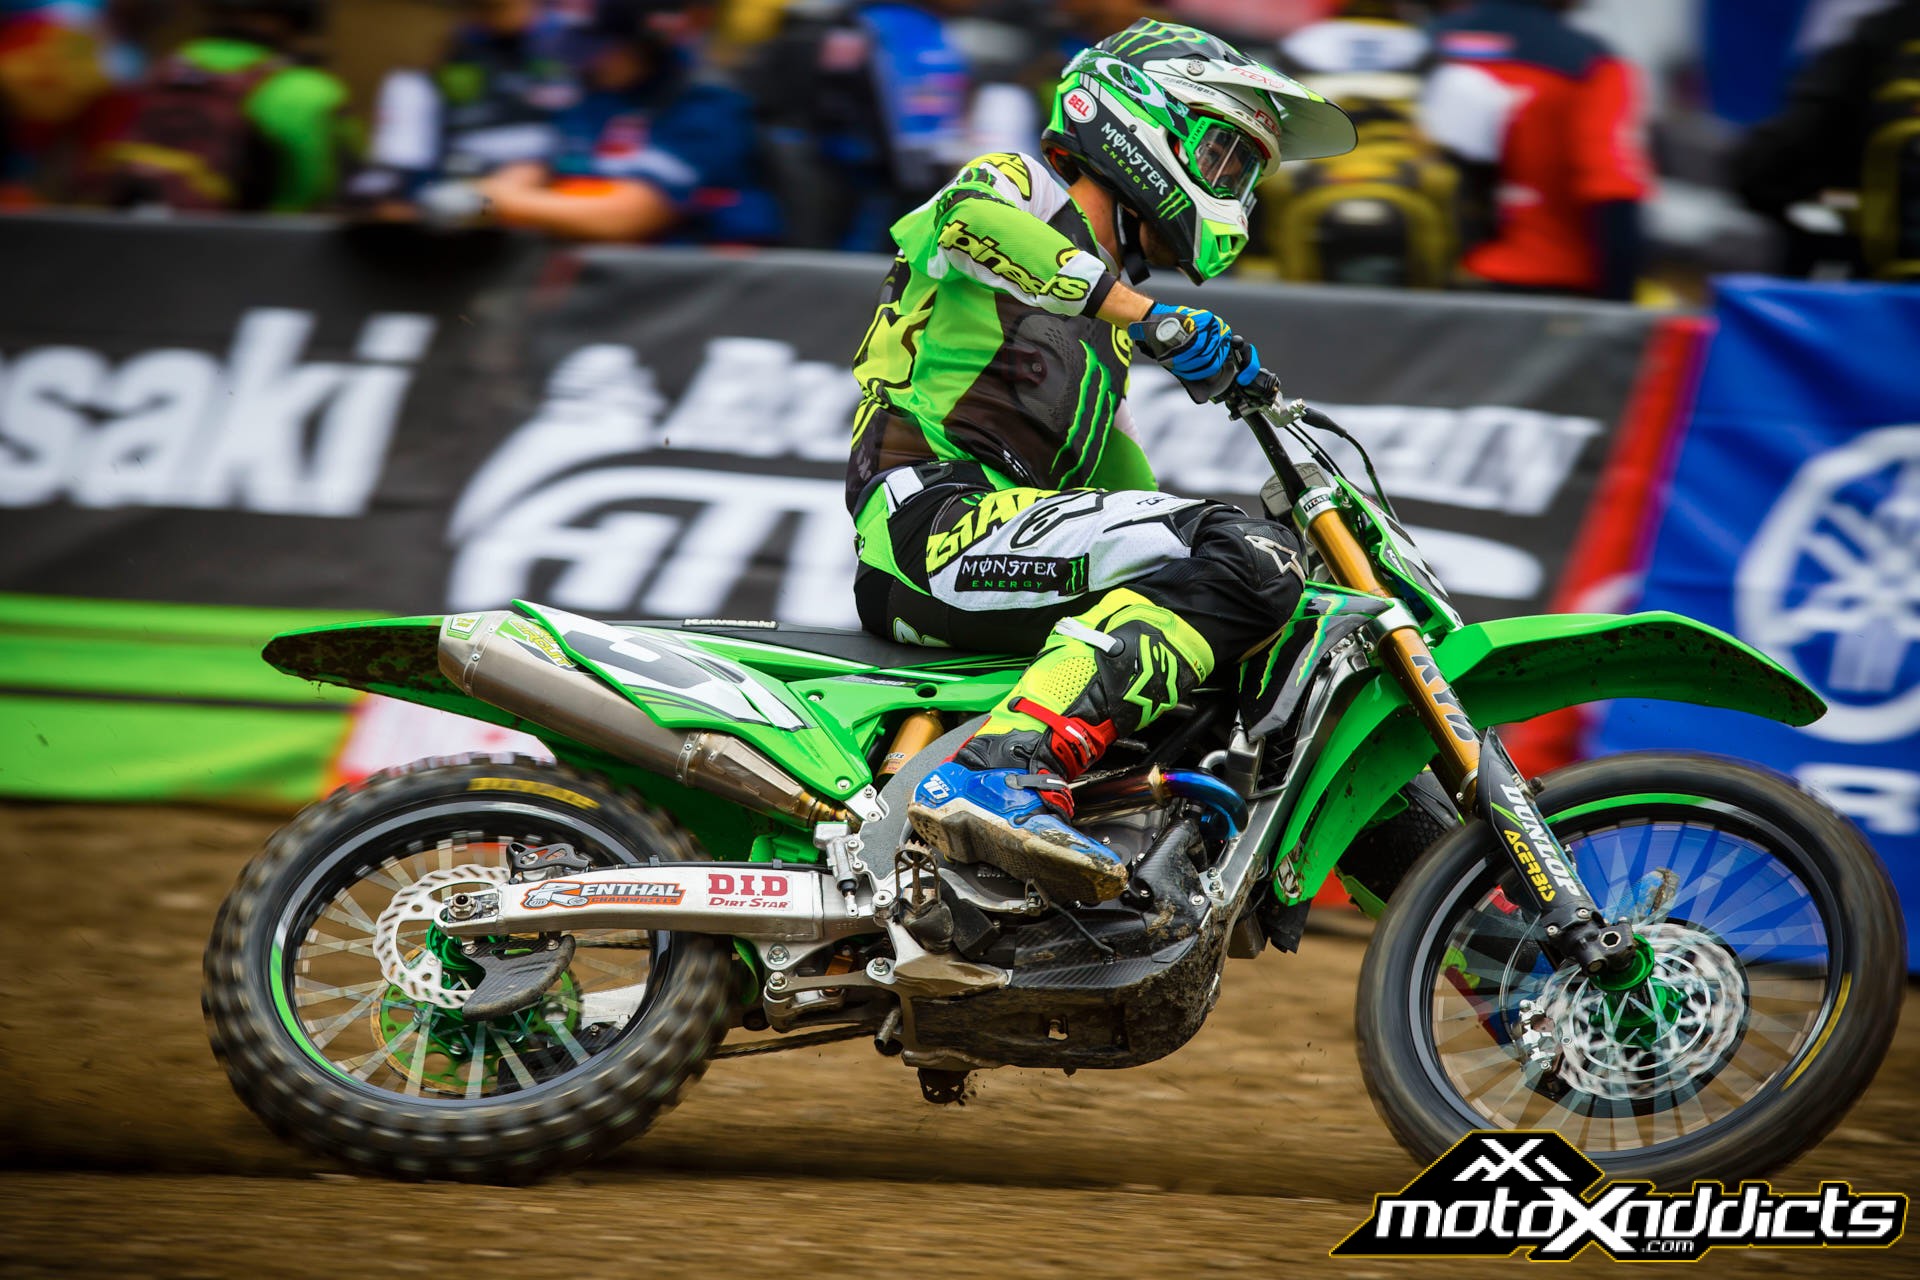 Tomac had a decent debut on the Kawasaki. The #3 qualified 4th, won his heat race and finished 4th in the 450SX main event. Photo by: Hoppenworld 